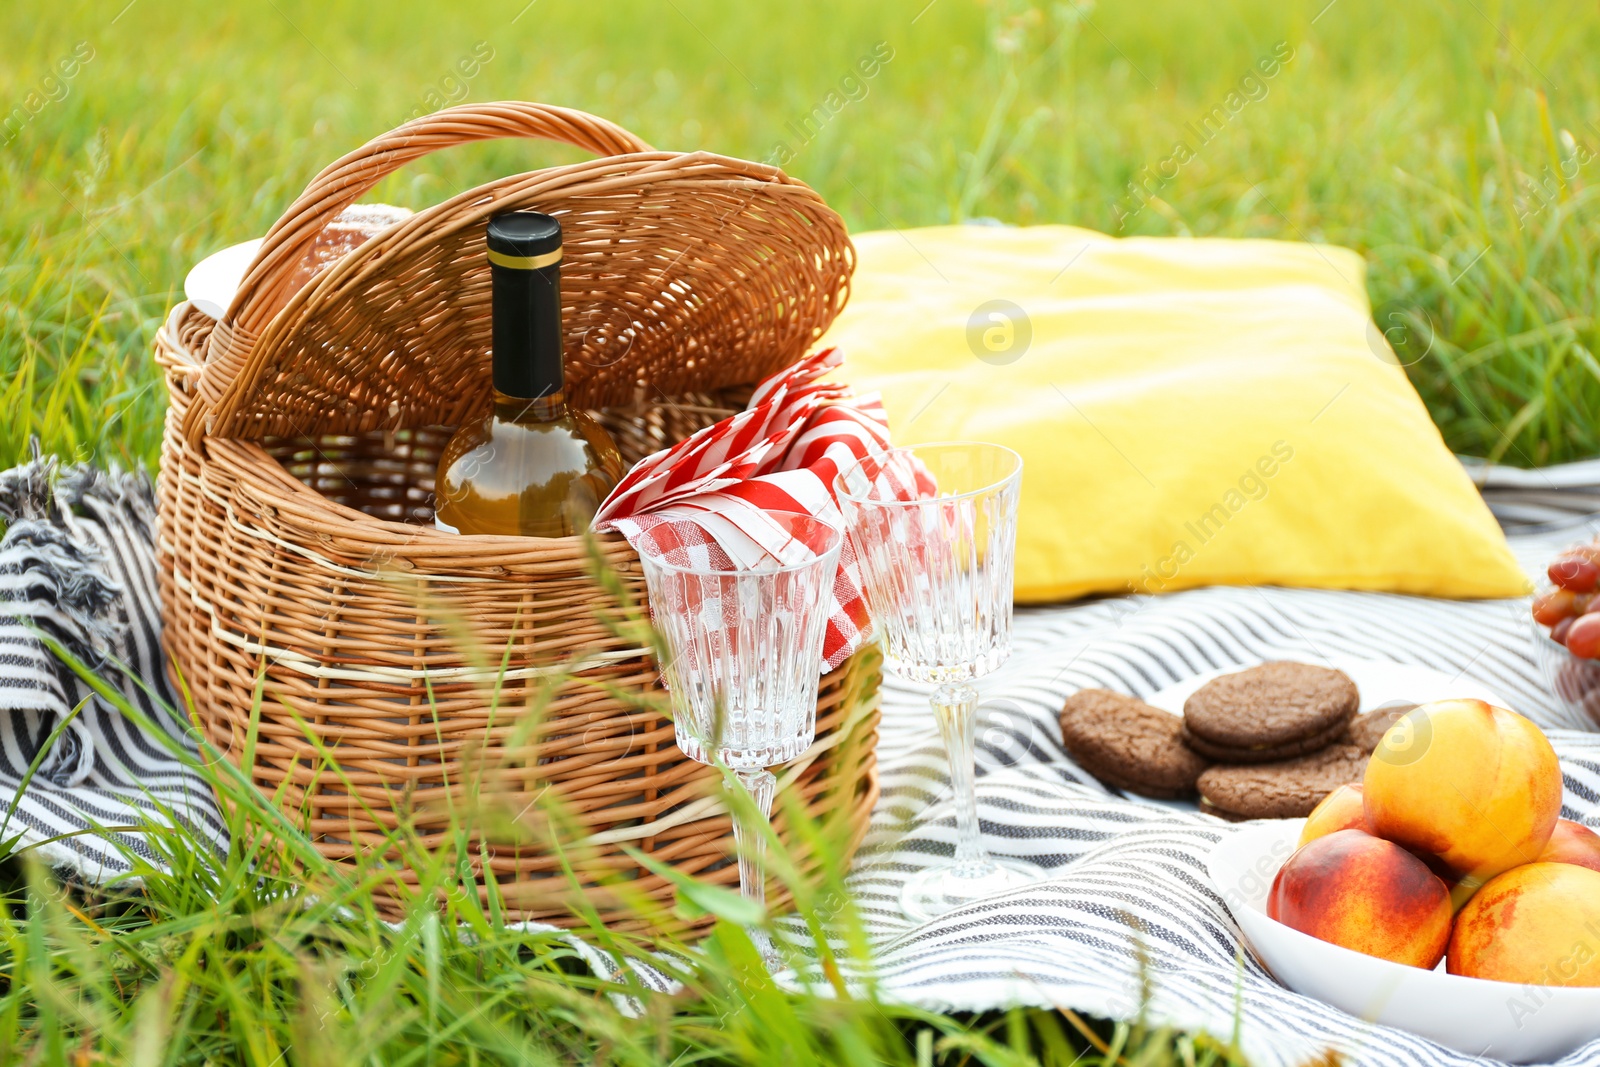 Photo of Wicker picnic basket with wine and glasses on blanket outdoors